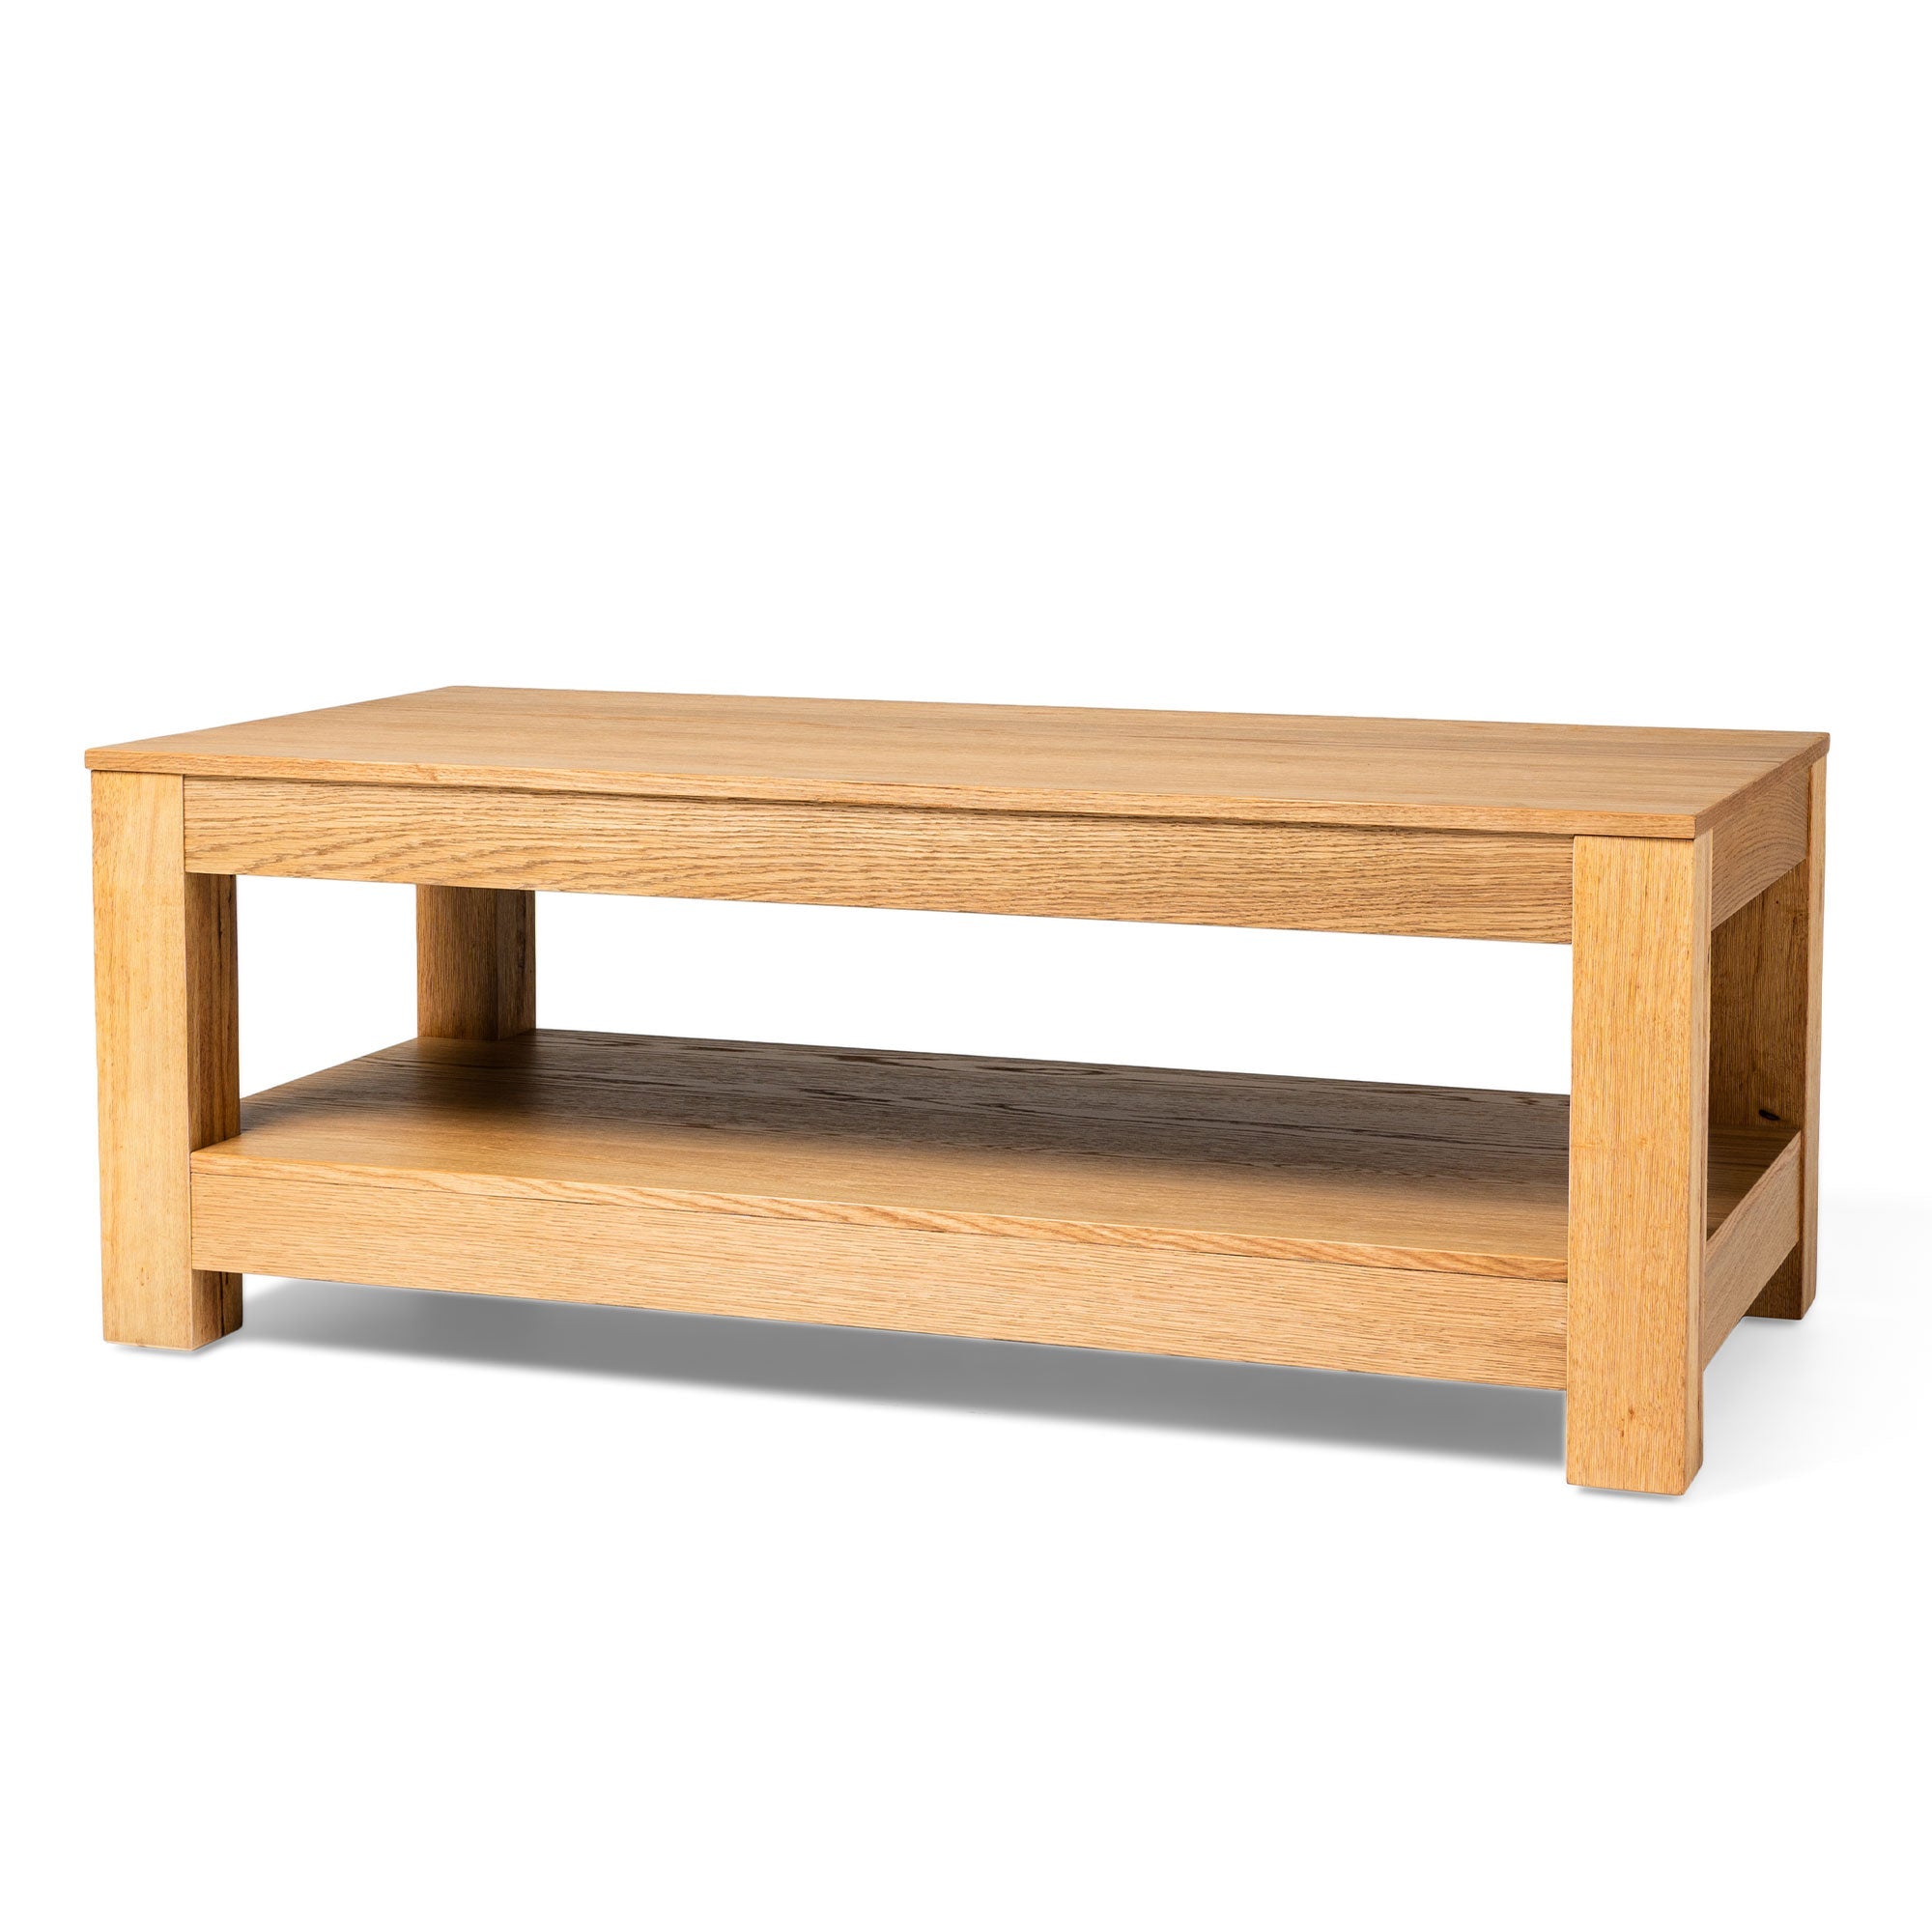 Paulo Wooden Coffee Table in Weathered Natural Finish in Accent Tables by Maven Lane